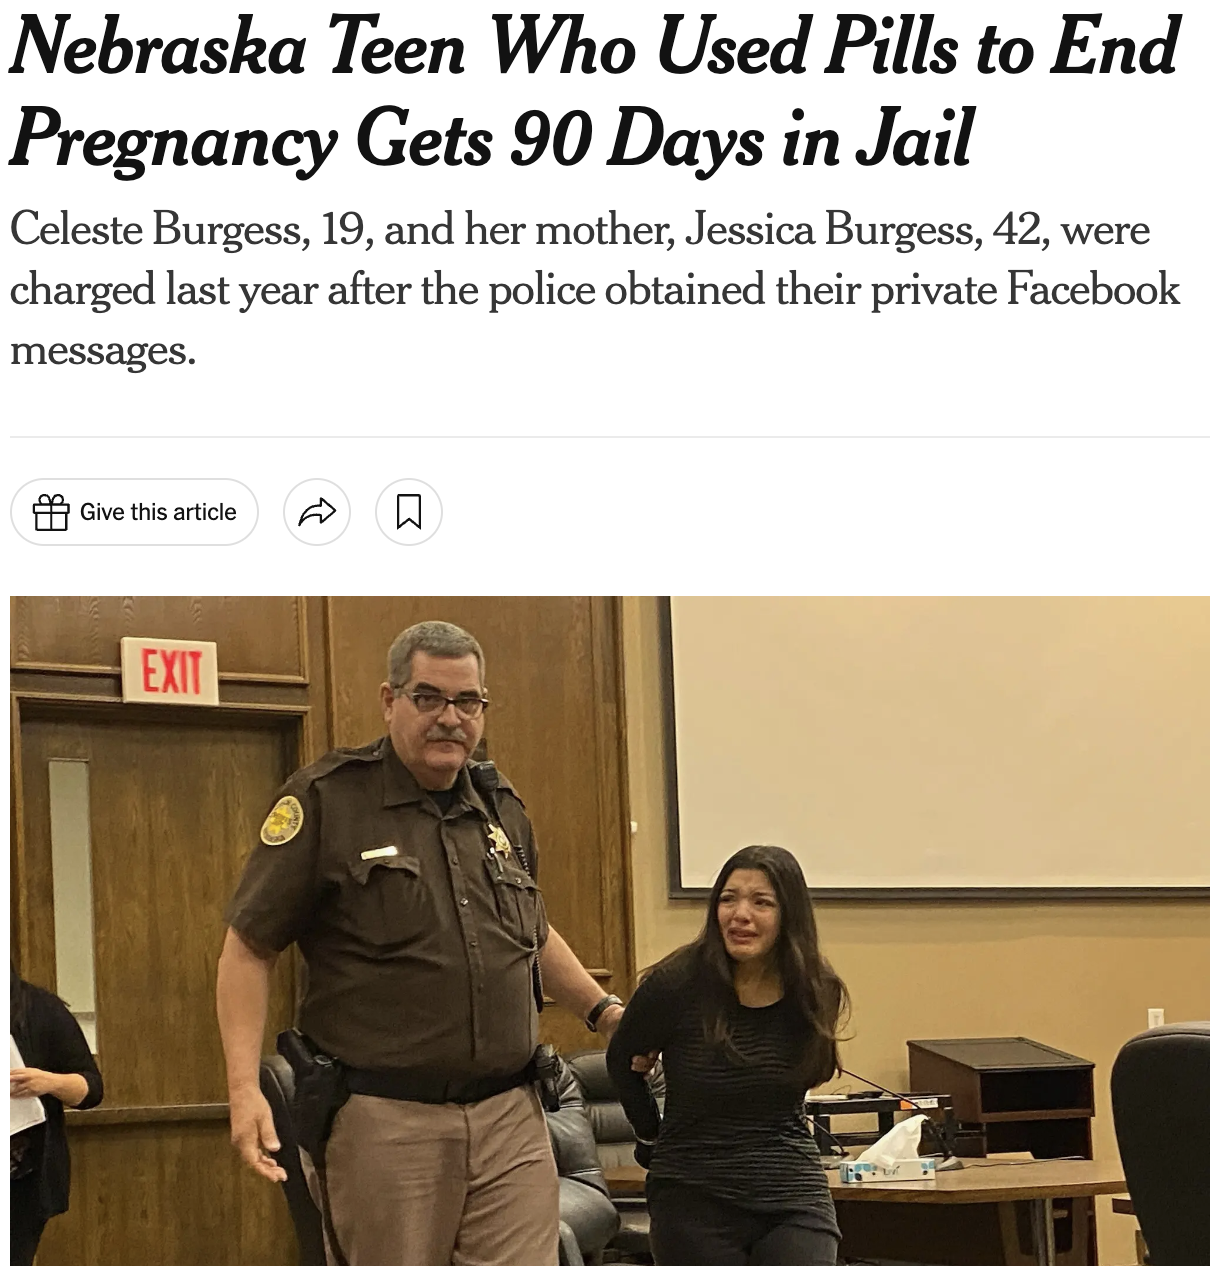 [Nebraska girl who used pills to end pregnancy gets 90 days in jail... the police obtained their private Facebook massages]